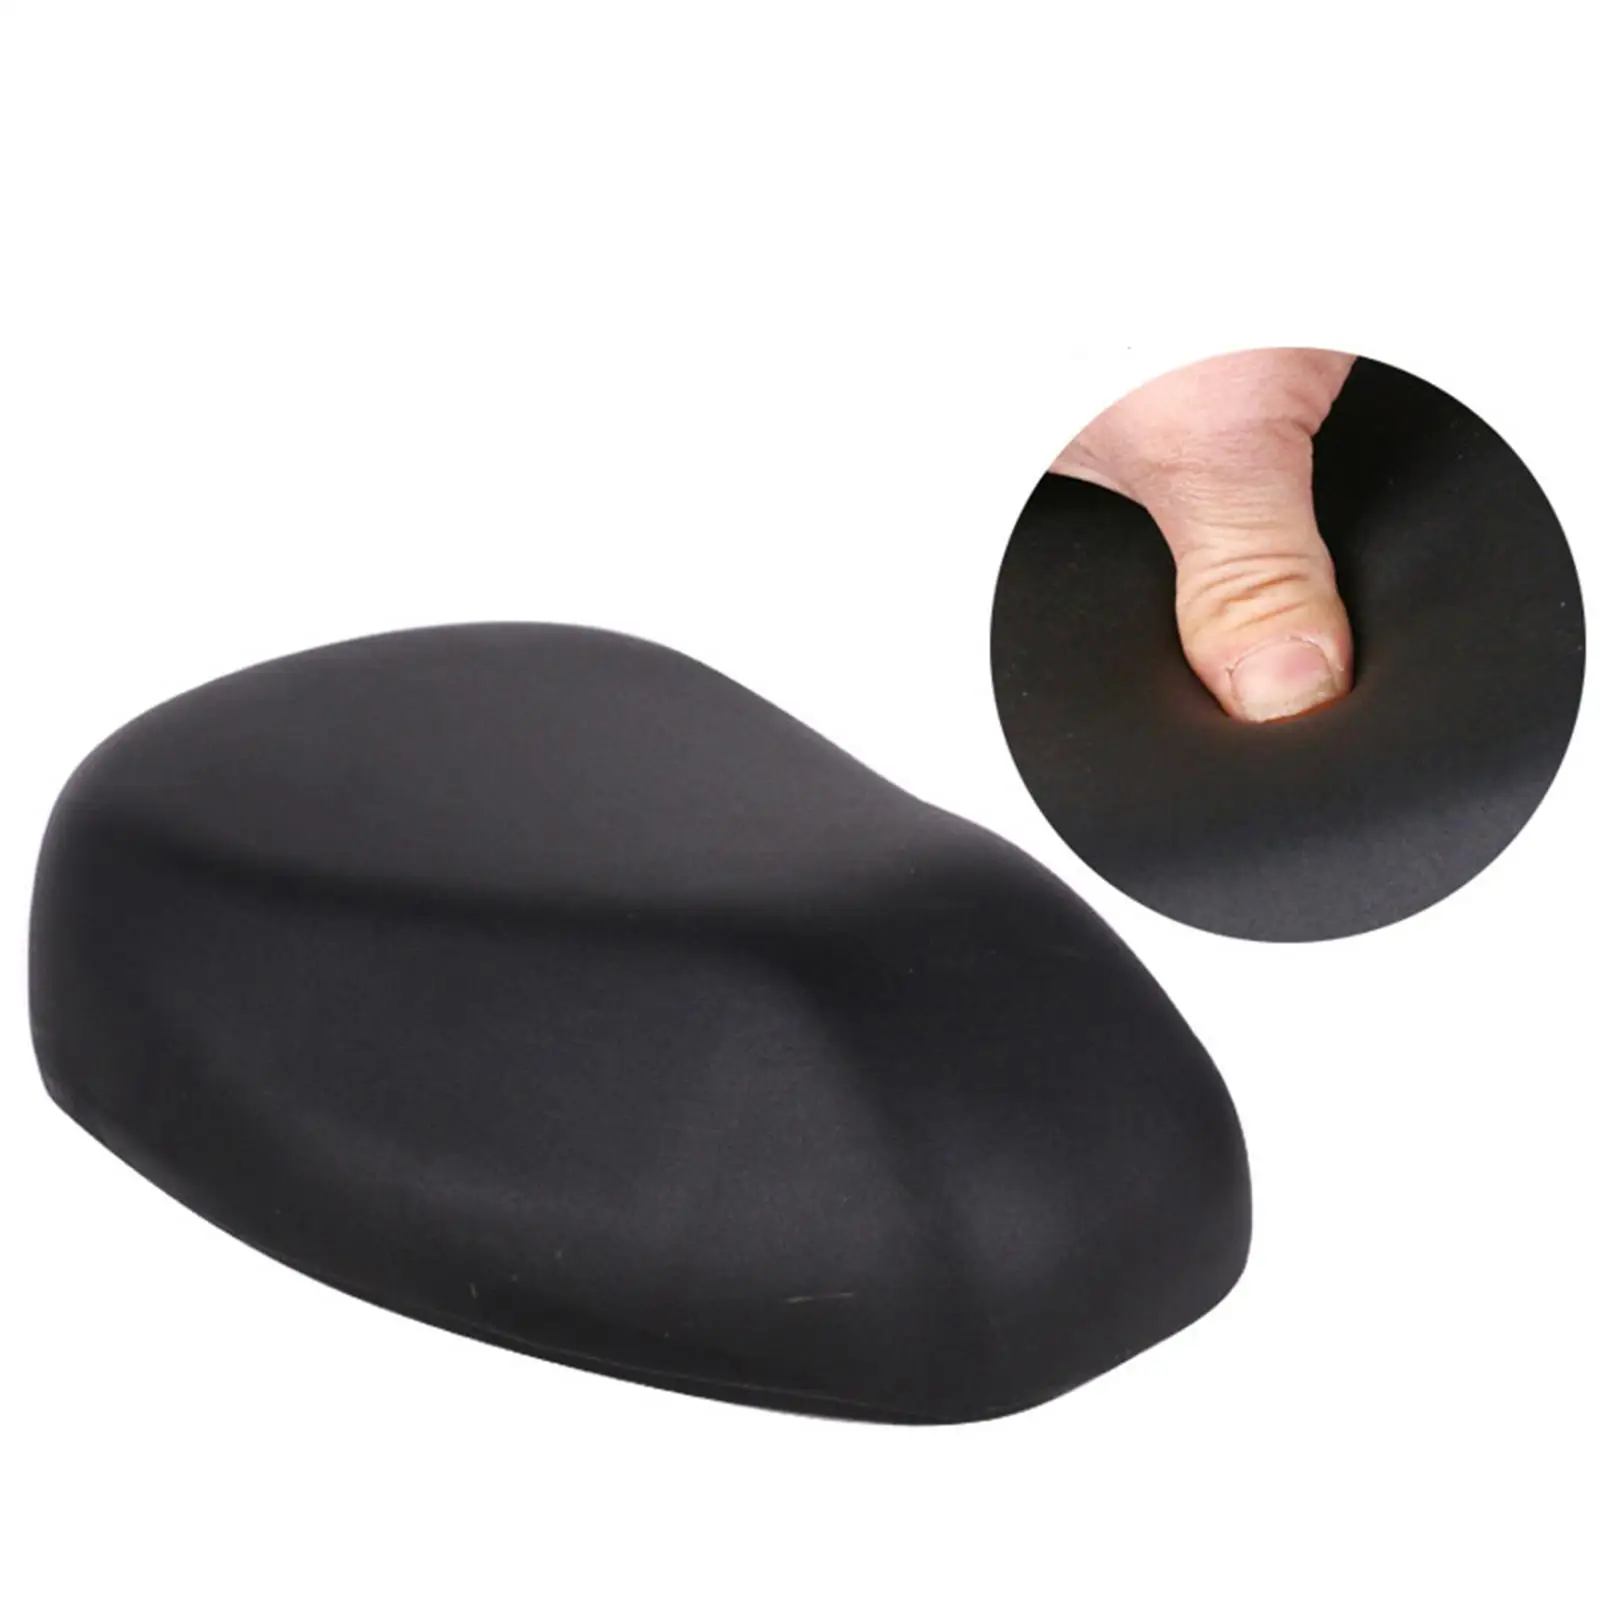 Bike Seat Cushion Replacement Saddle Firm Fit for Bicycle Electric Scooter